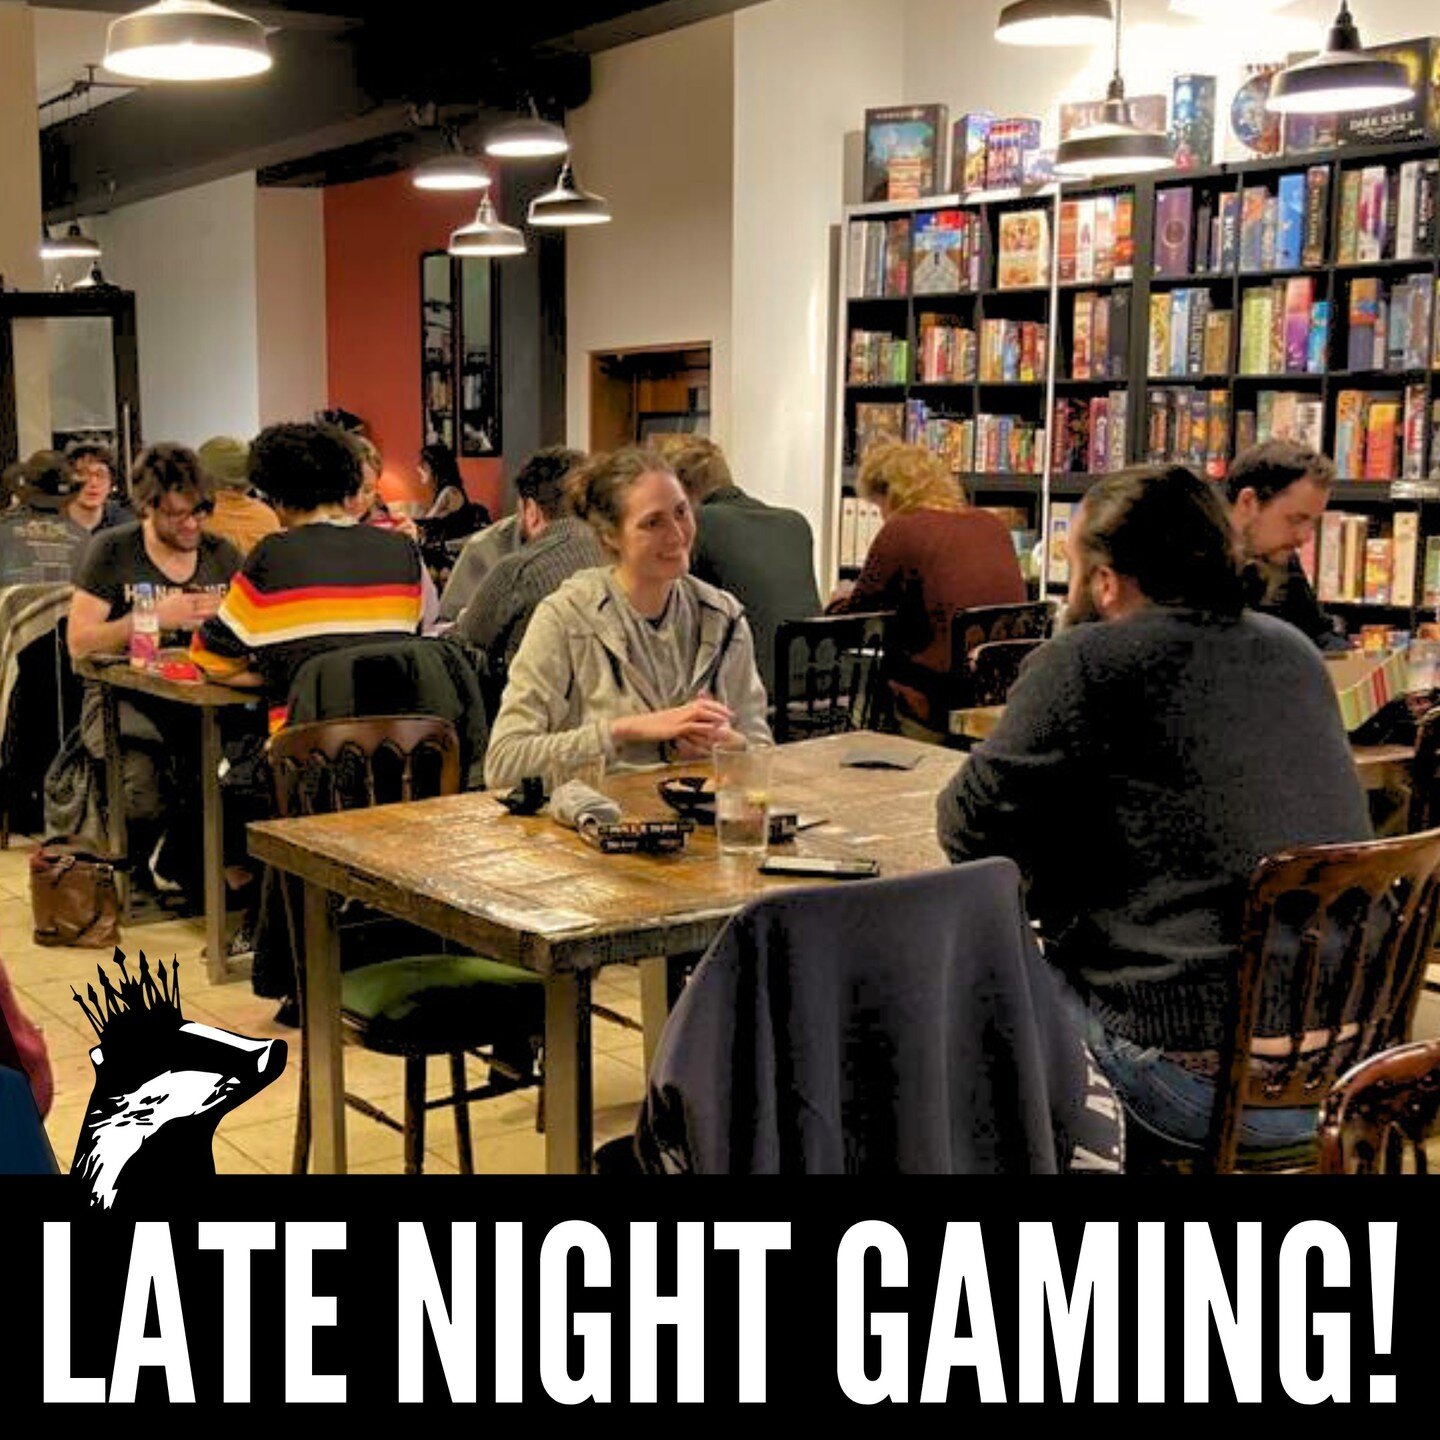 🎲🌃 Late night board gaming? Say no more! 🦡🎉 

Badger Badger now offers board game sessions until 1am every Friday and Saturday. (And 11pm all other nights of the week!) 

Come down and get your game on:
badgerbadger.org/book-a-table